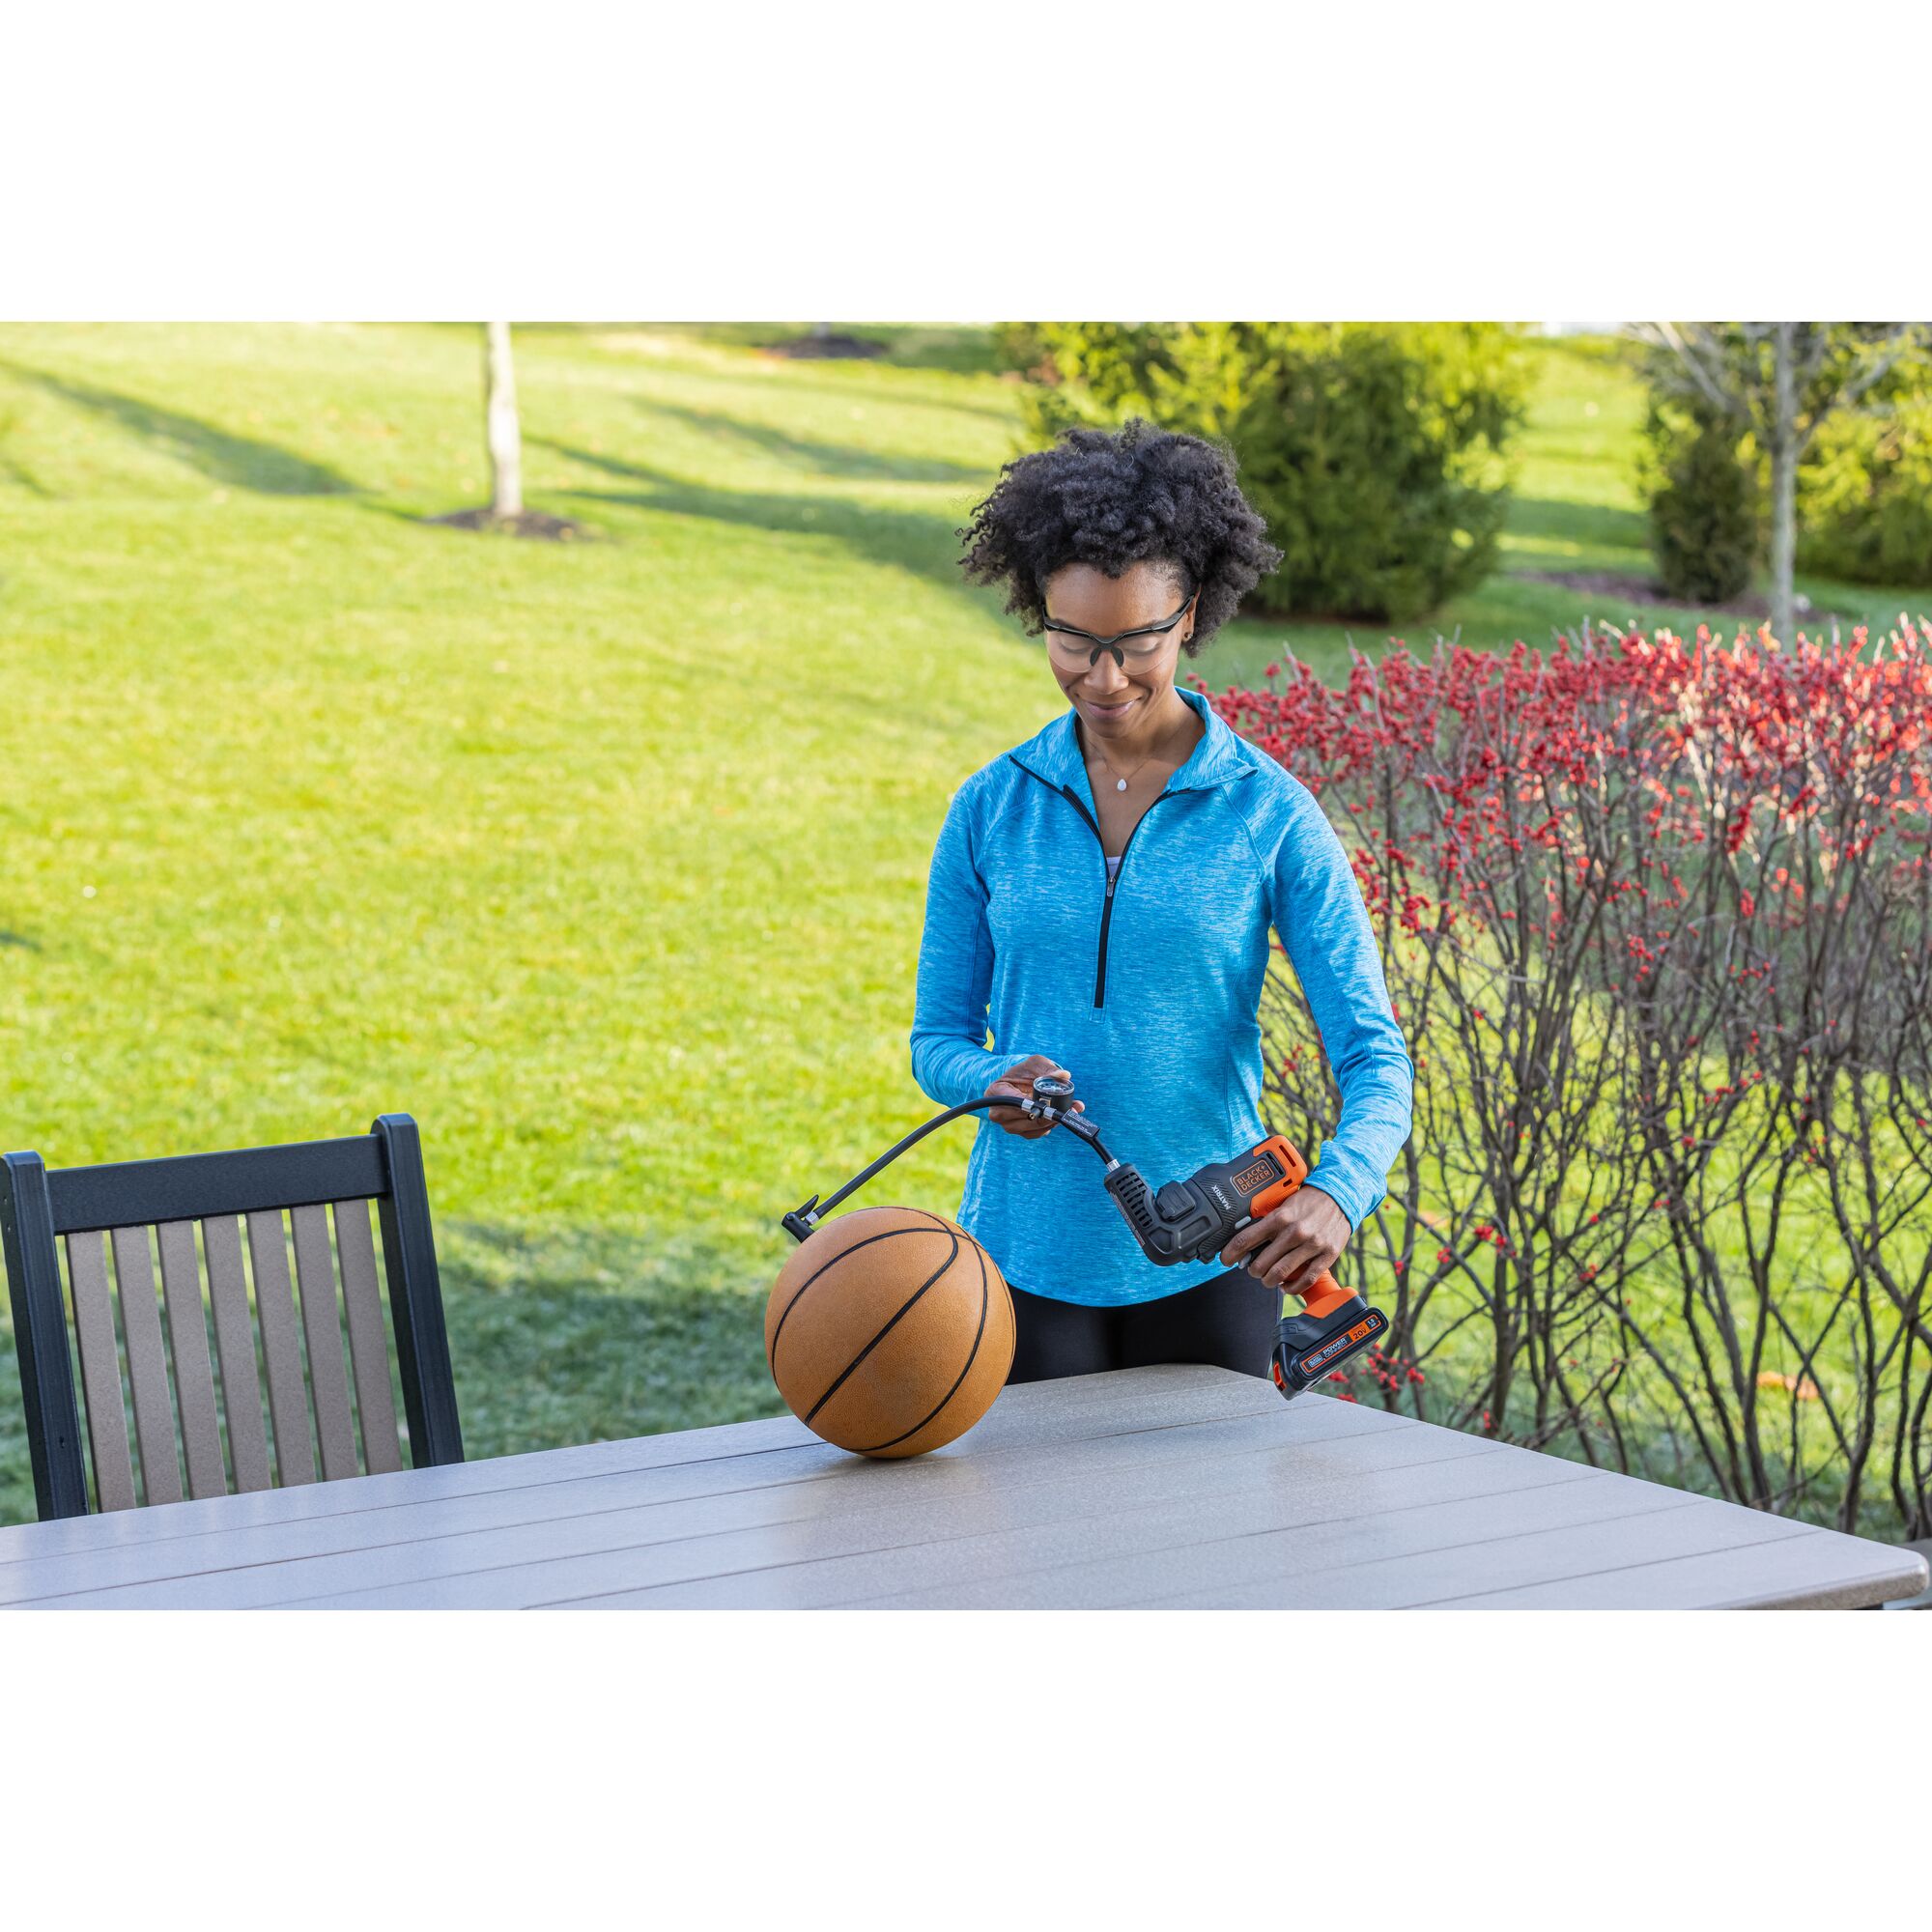 Person inflates a basketball with the BLACK+DECKER MATRIX inflator attachment